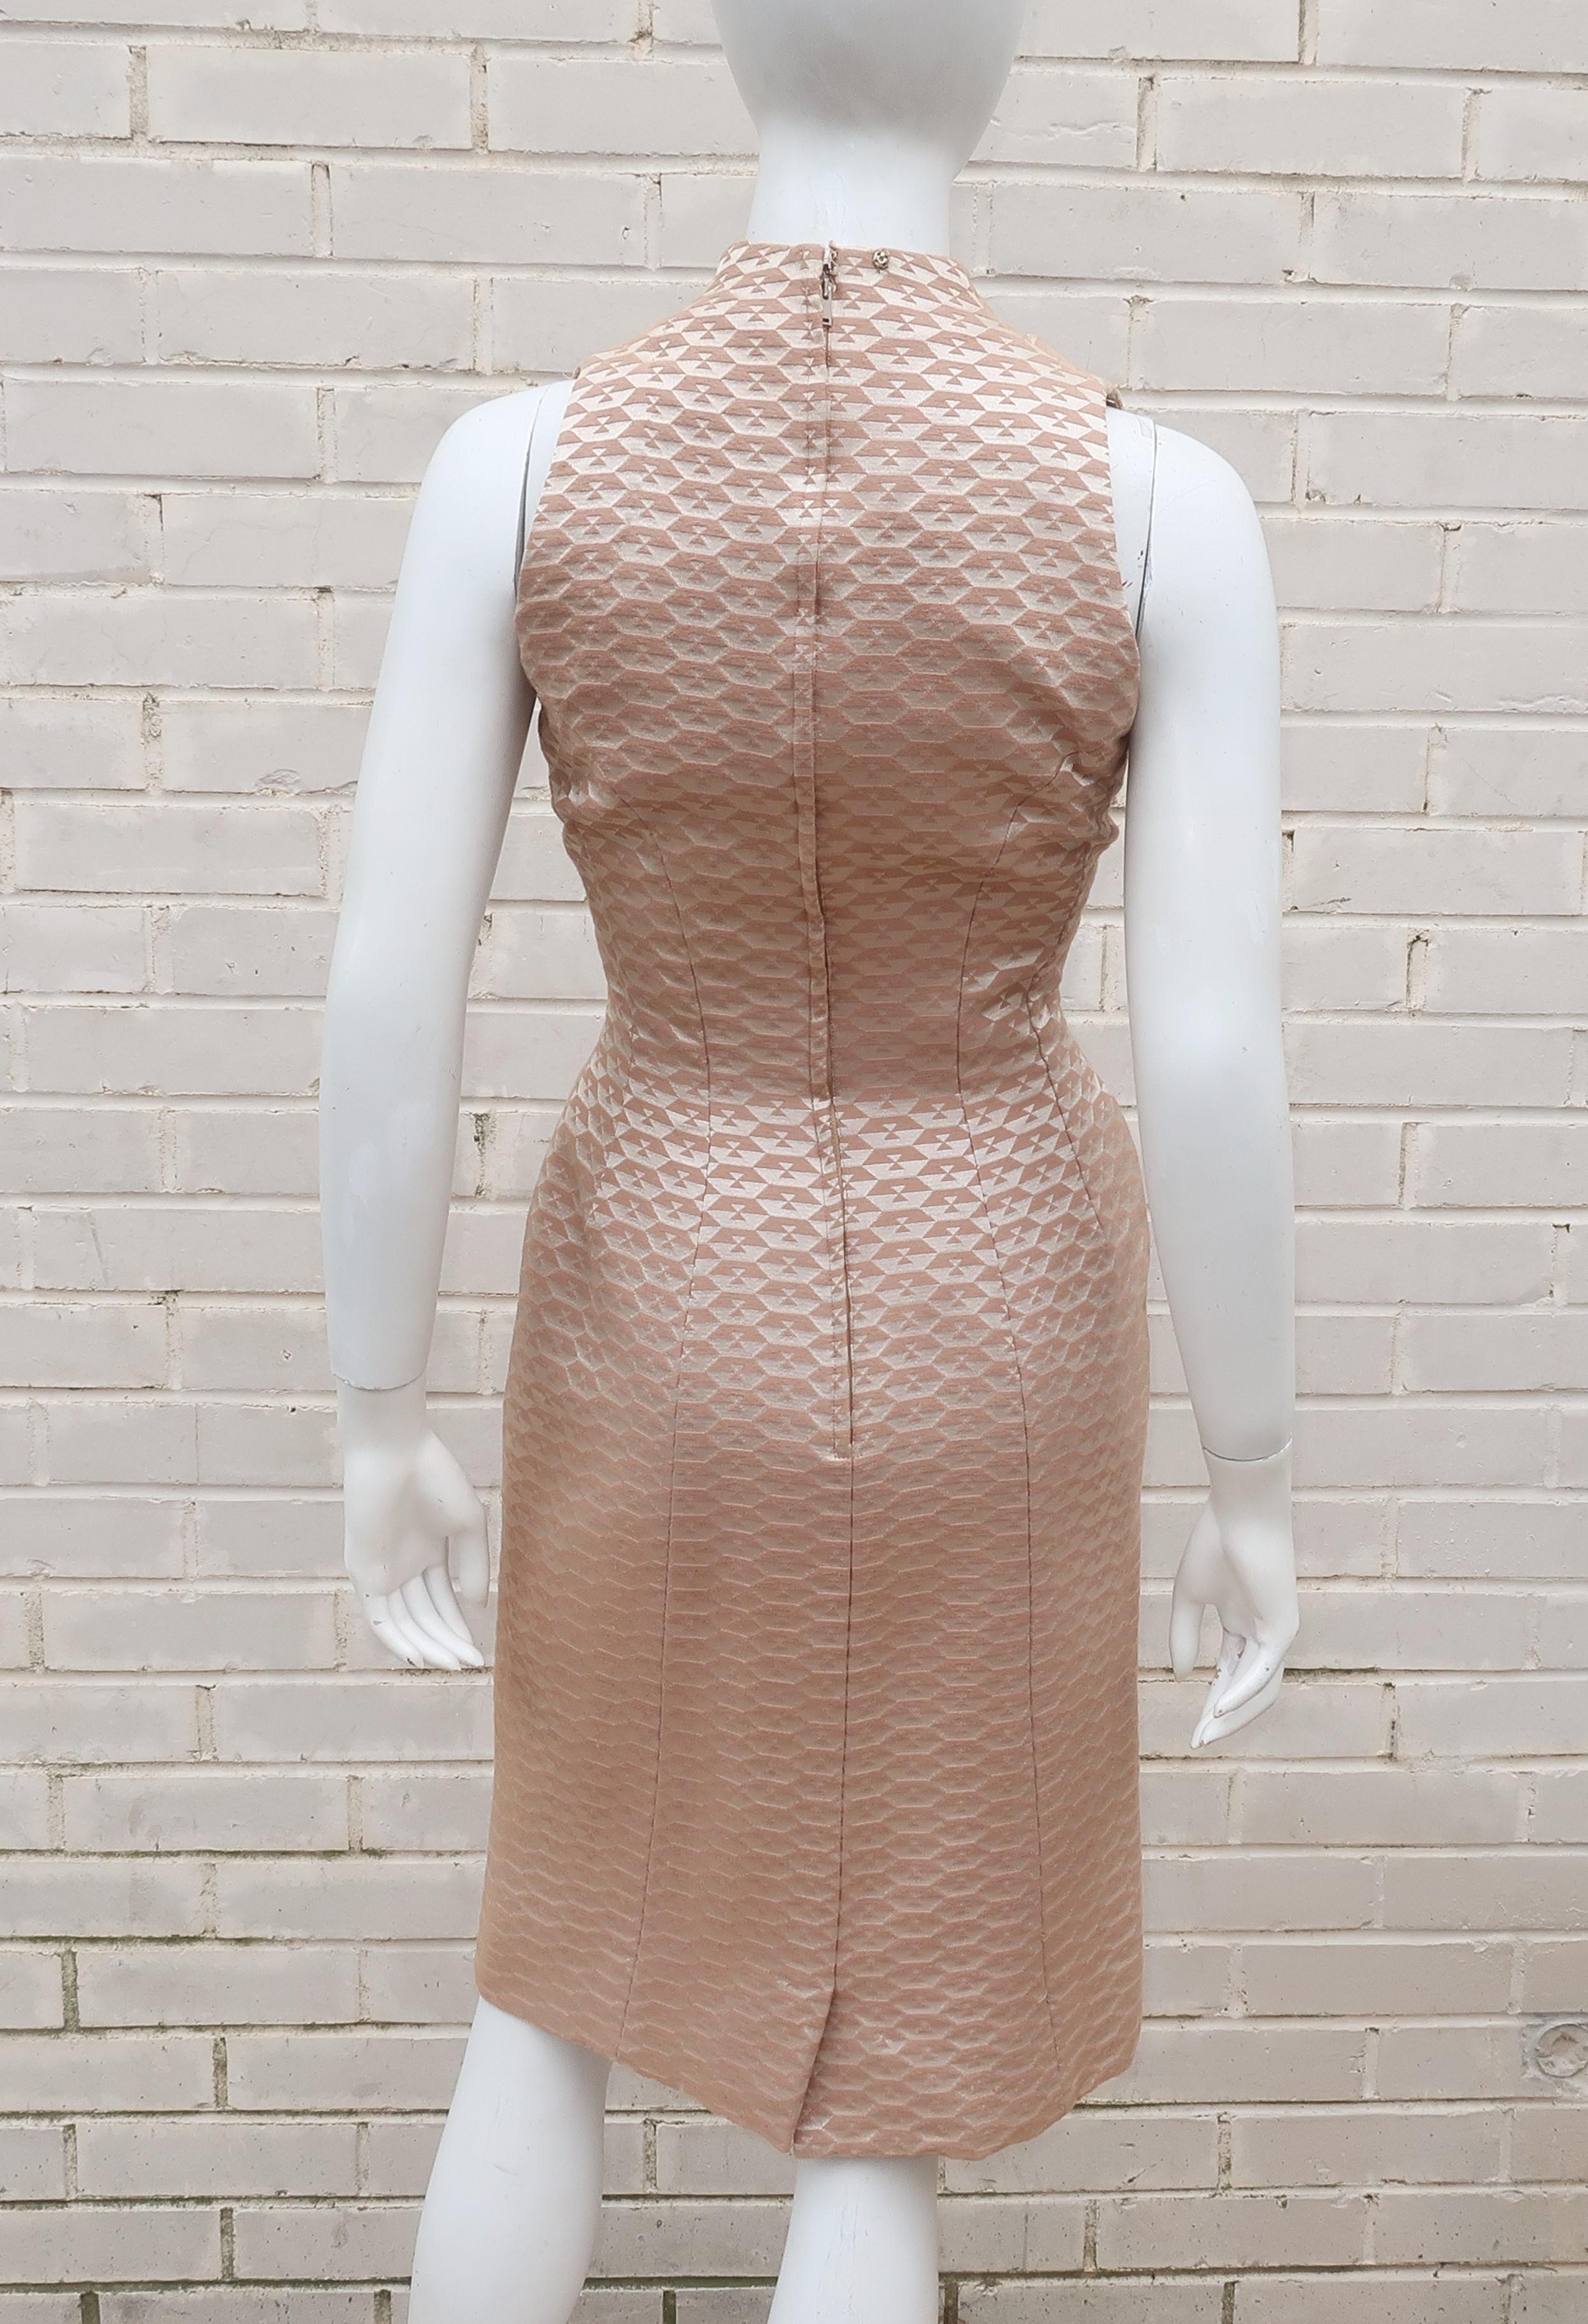 GiGi Young Champagne Brocade Cocktail Dress, C.1960 2